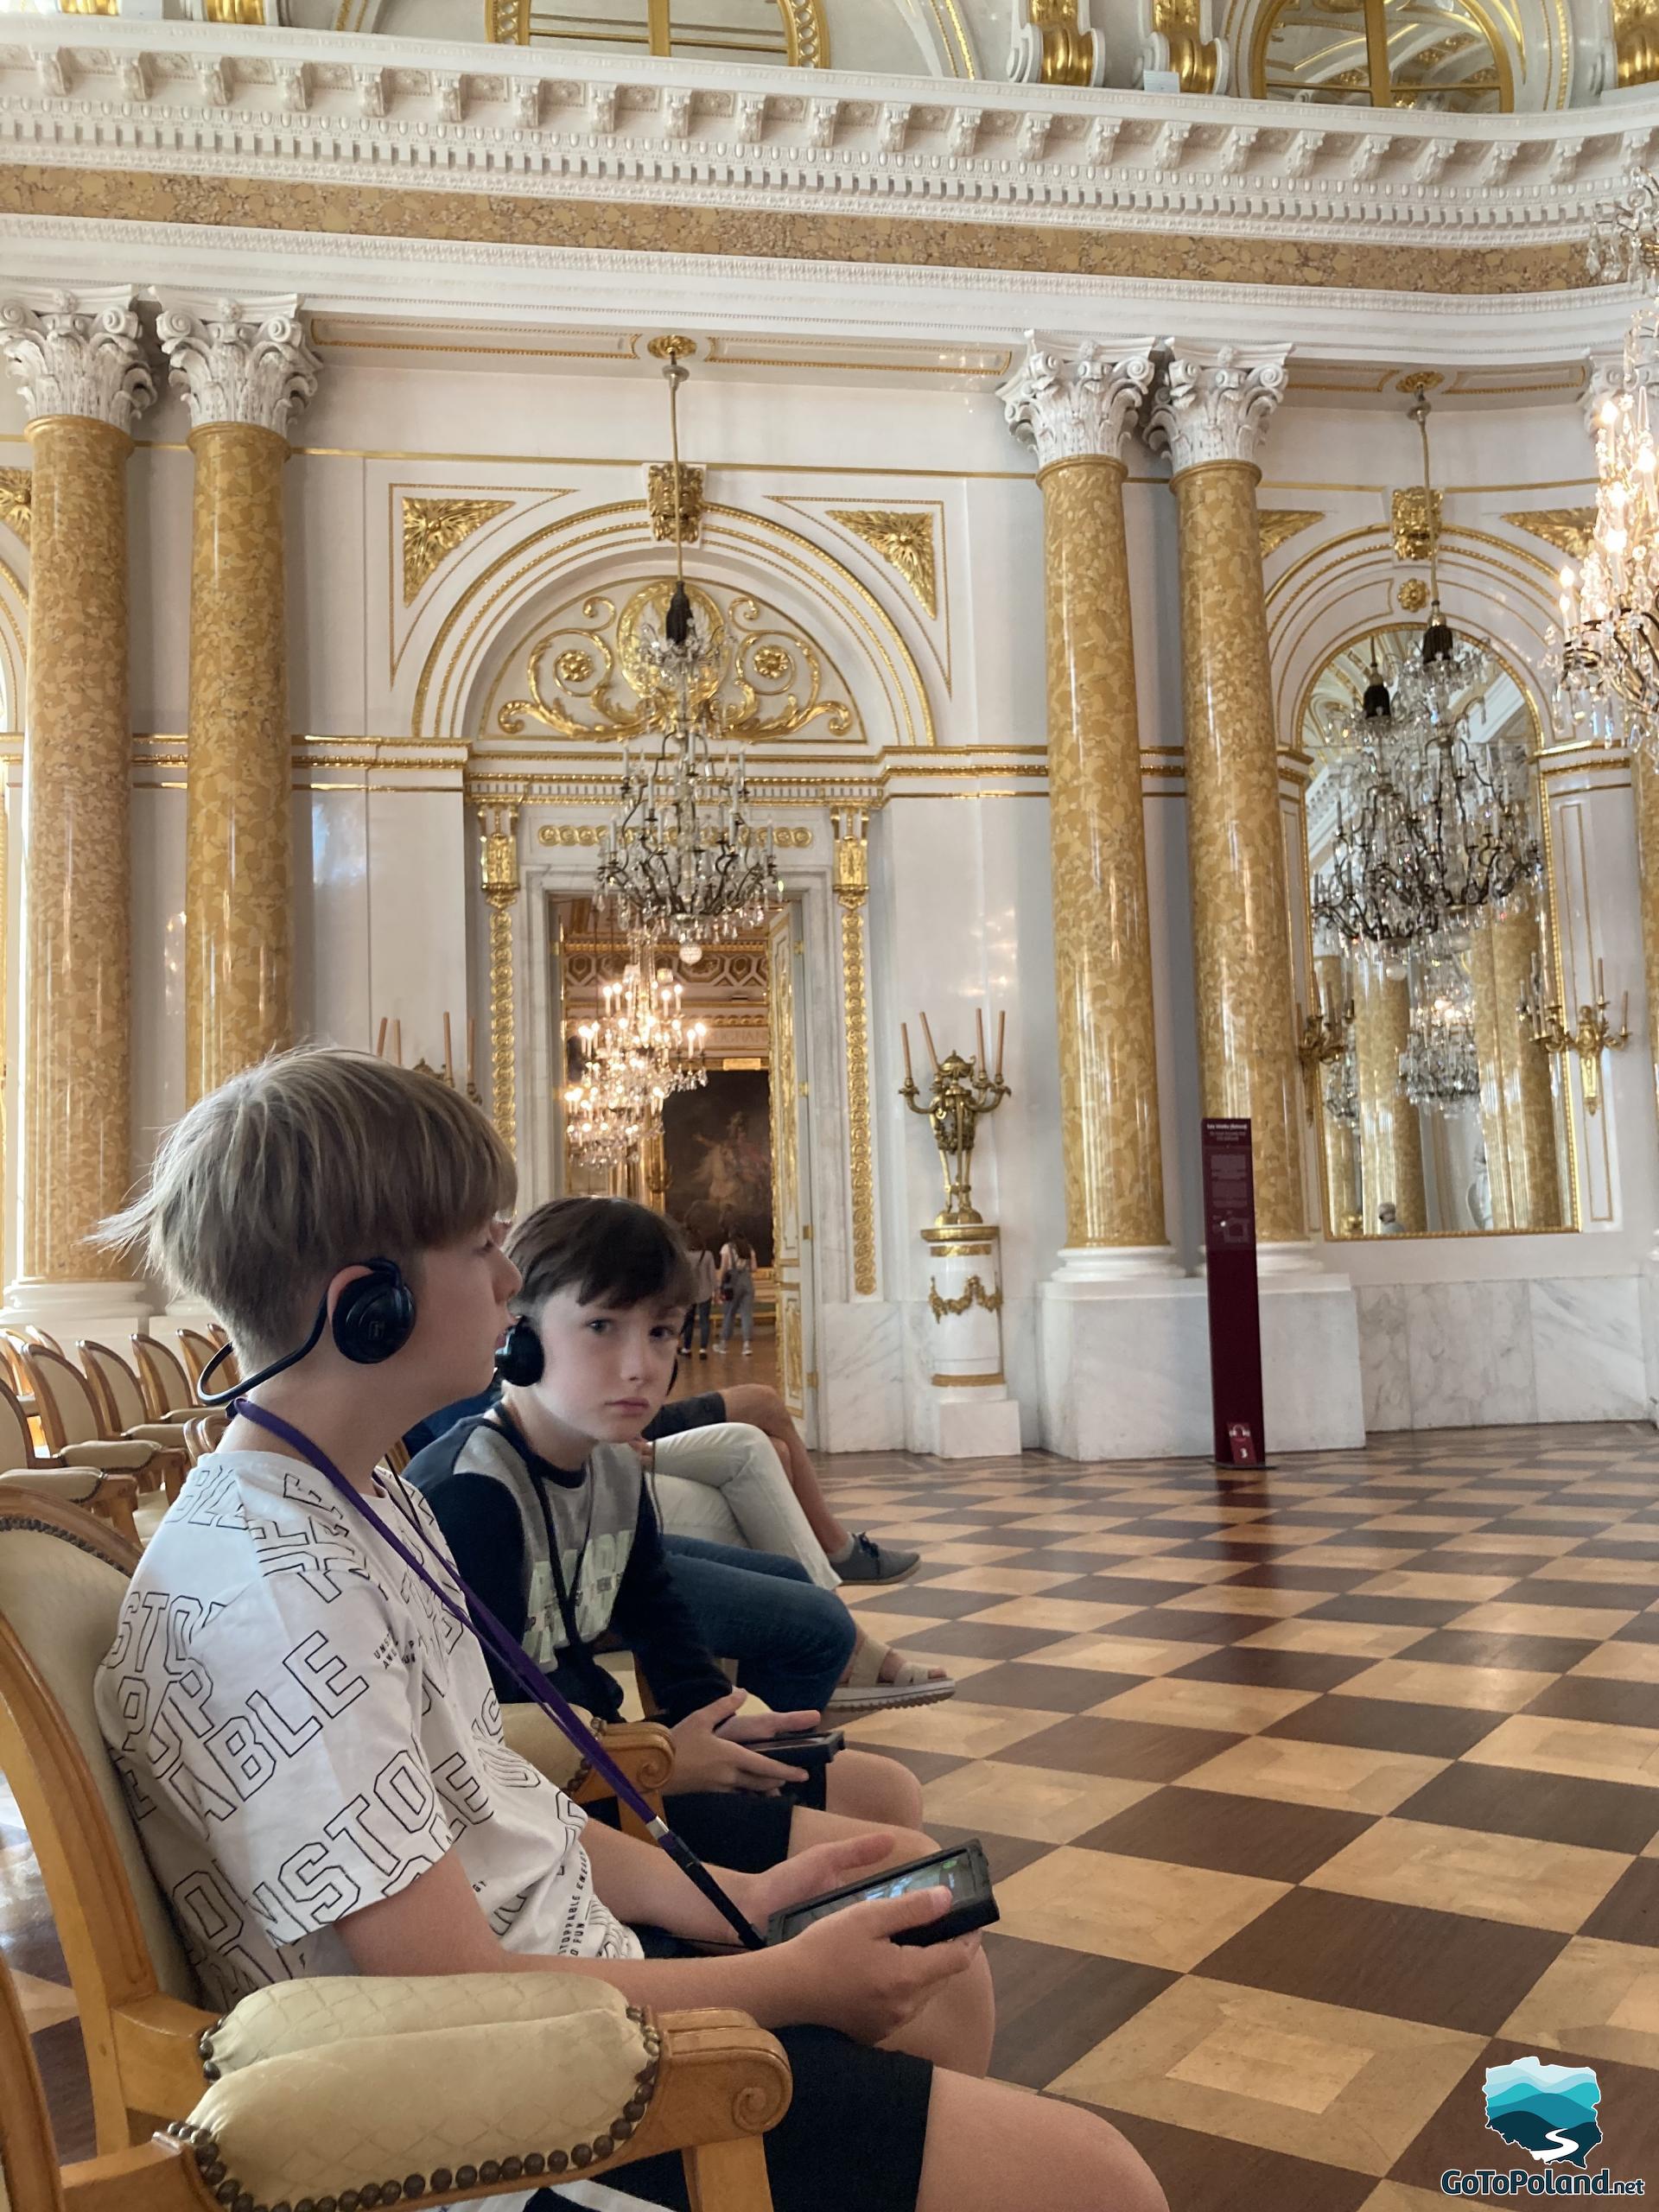 two boys are sitting in the ballroom, they have audioguides in their hands and headphones on their ears, the hall is decorated with Roman-style columns and huge crystal chandeliers